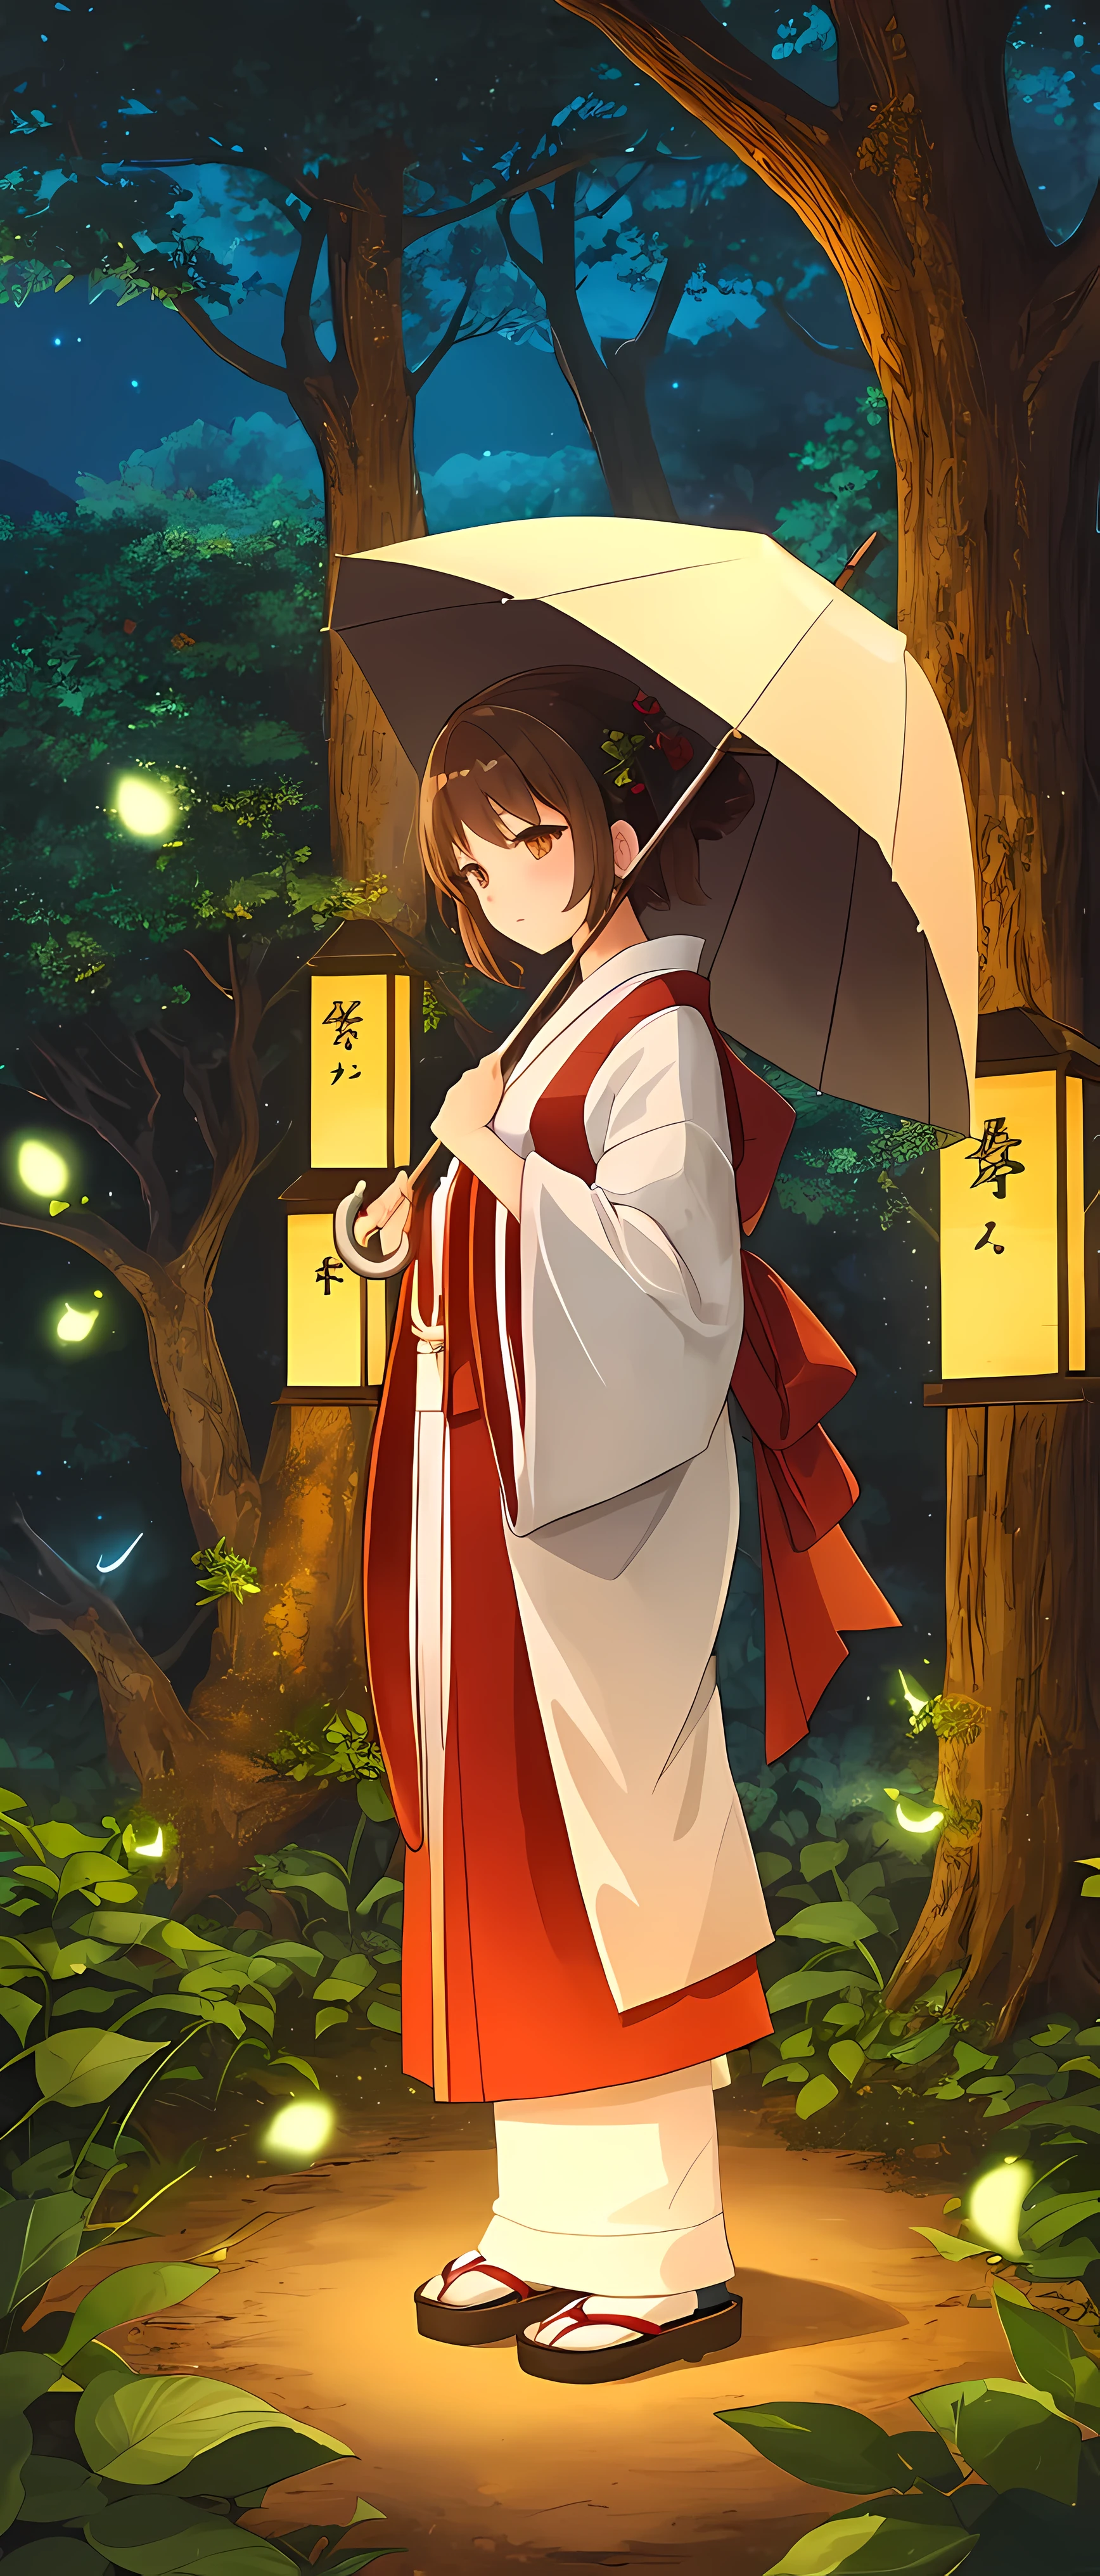 (masterpiece, best quality, highres:1.3), ultra resolution image, (1girl), (solo), kawaii, brown hair, night, miko, shrine maiden, shigai, traditional attire, shiny umbrella, kagura, (sacred grove:1.4), talisman, mist, serene mystery, sanctuary, sparkling magic, glowing ancient stone, shrine, old trees, beautiful lighting, mythical, spirit realm, spirit, glowing fireflies, (night time:1.2), calm, scenery, (simple background:1.3), trainquill expression, firefly of the light,